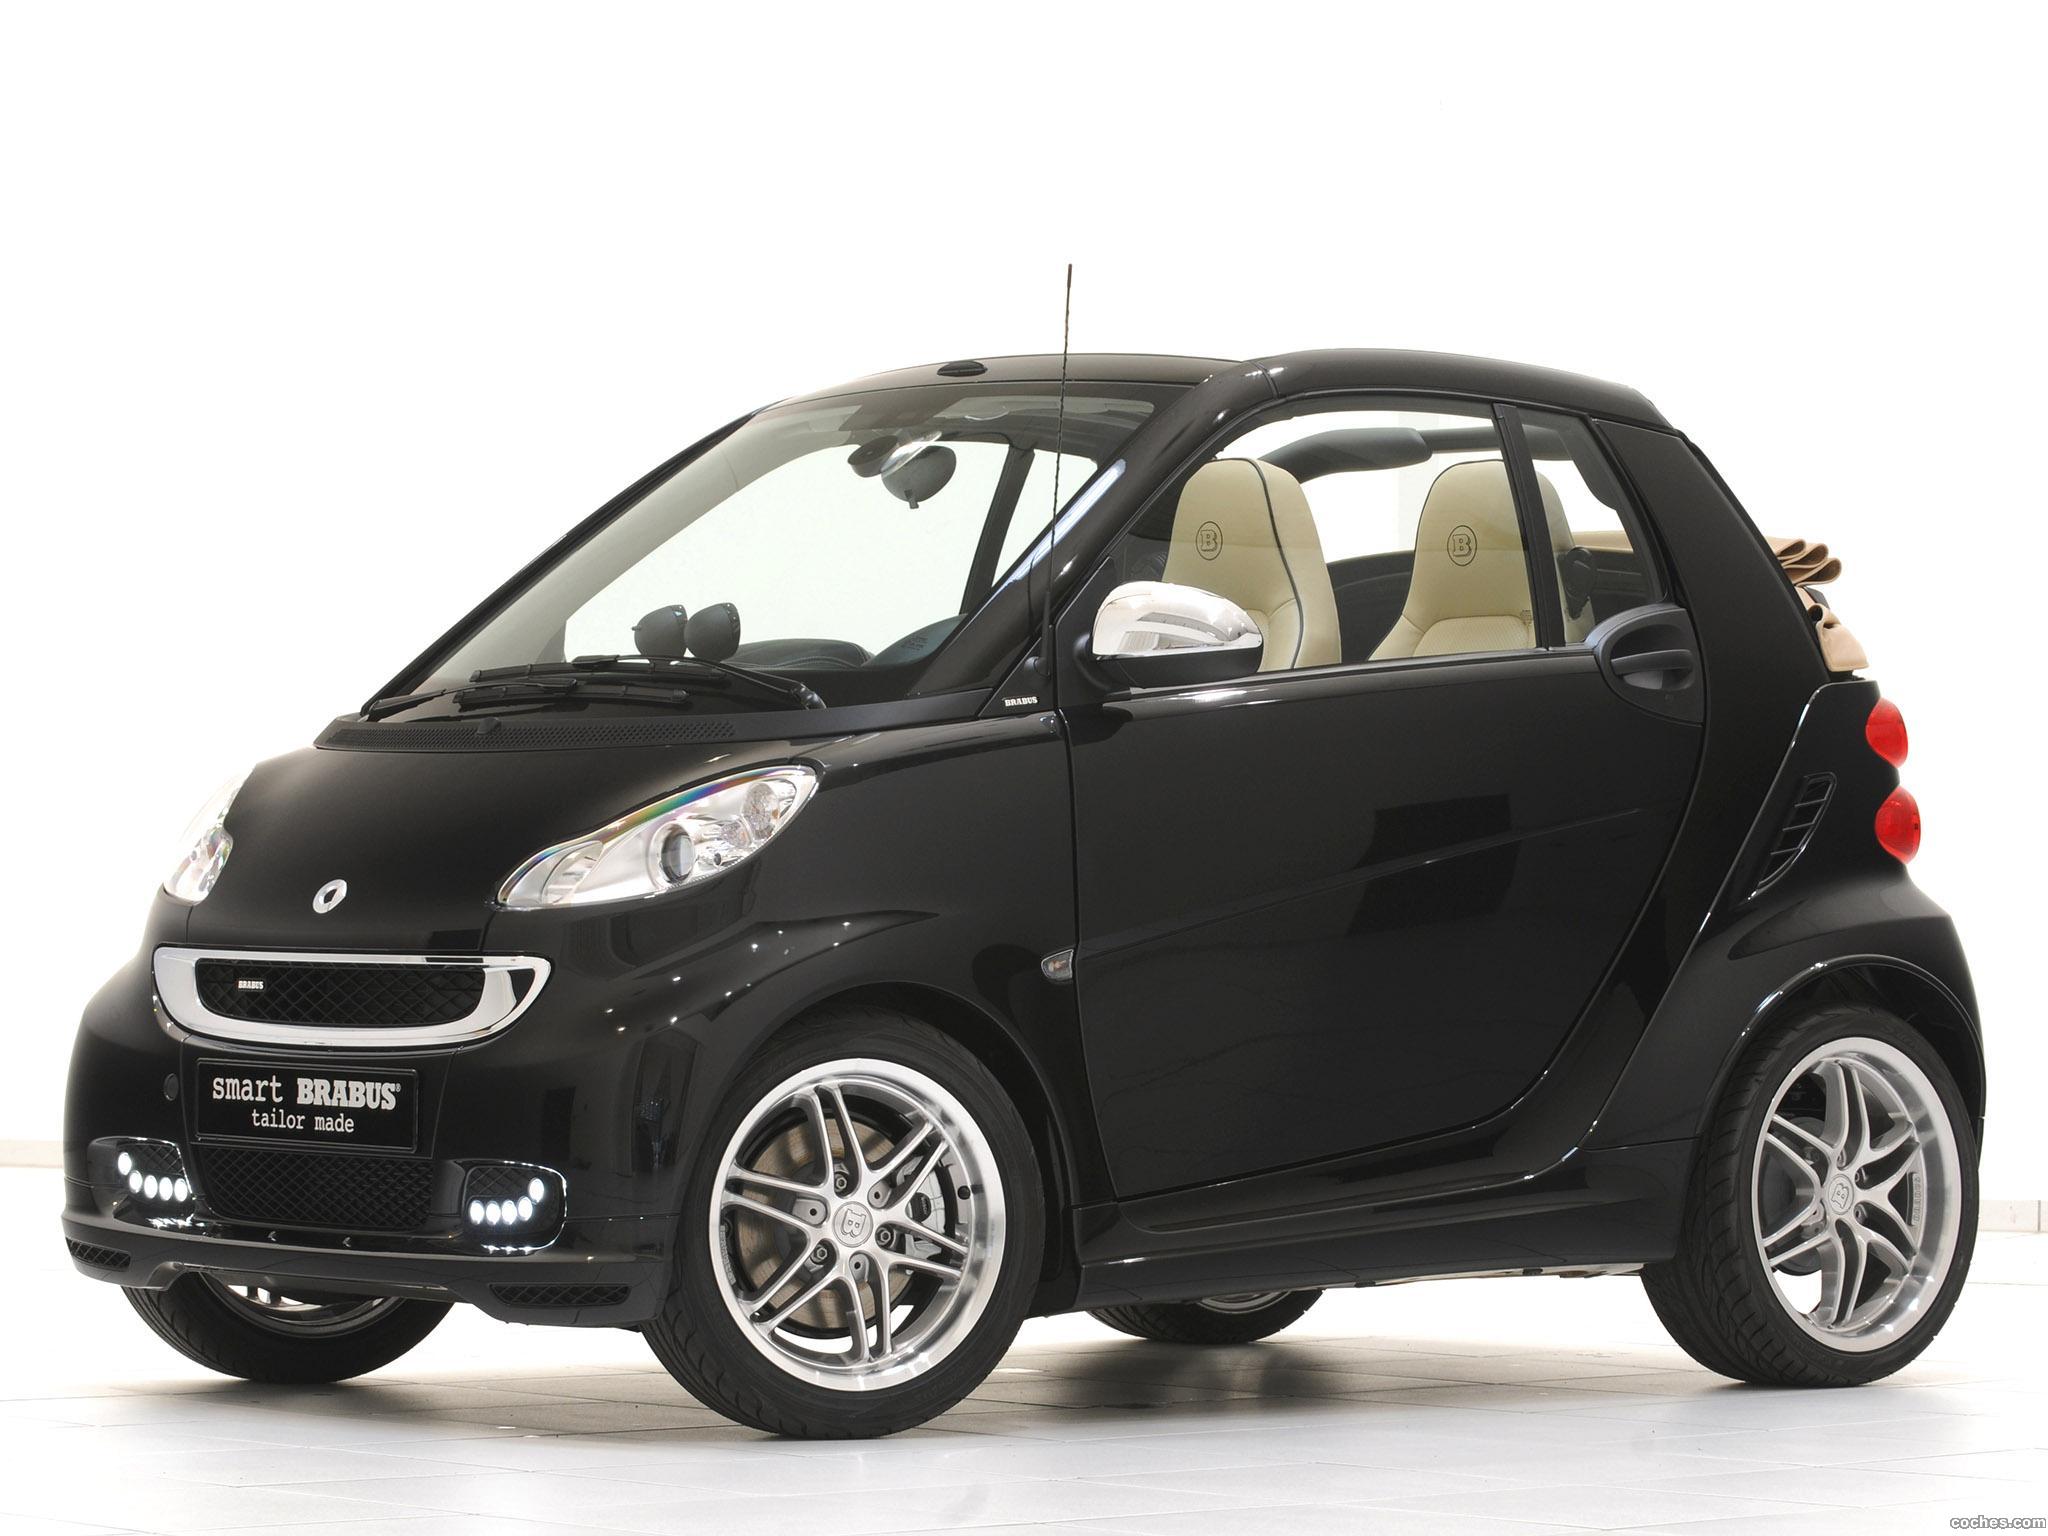 brabus_smart-for-two-tailor-made-cabrio-2010_r6.jpg